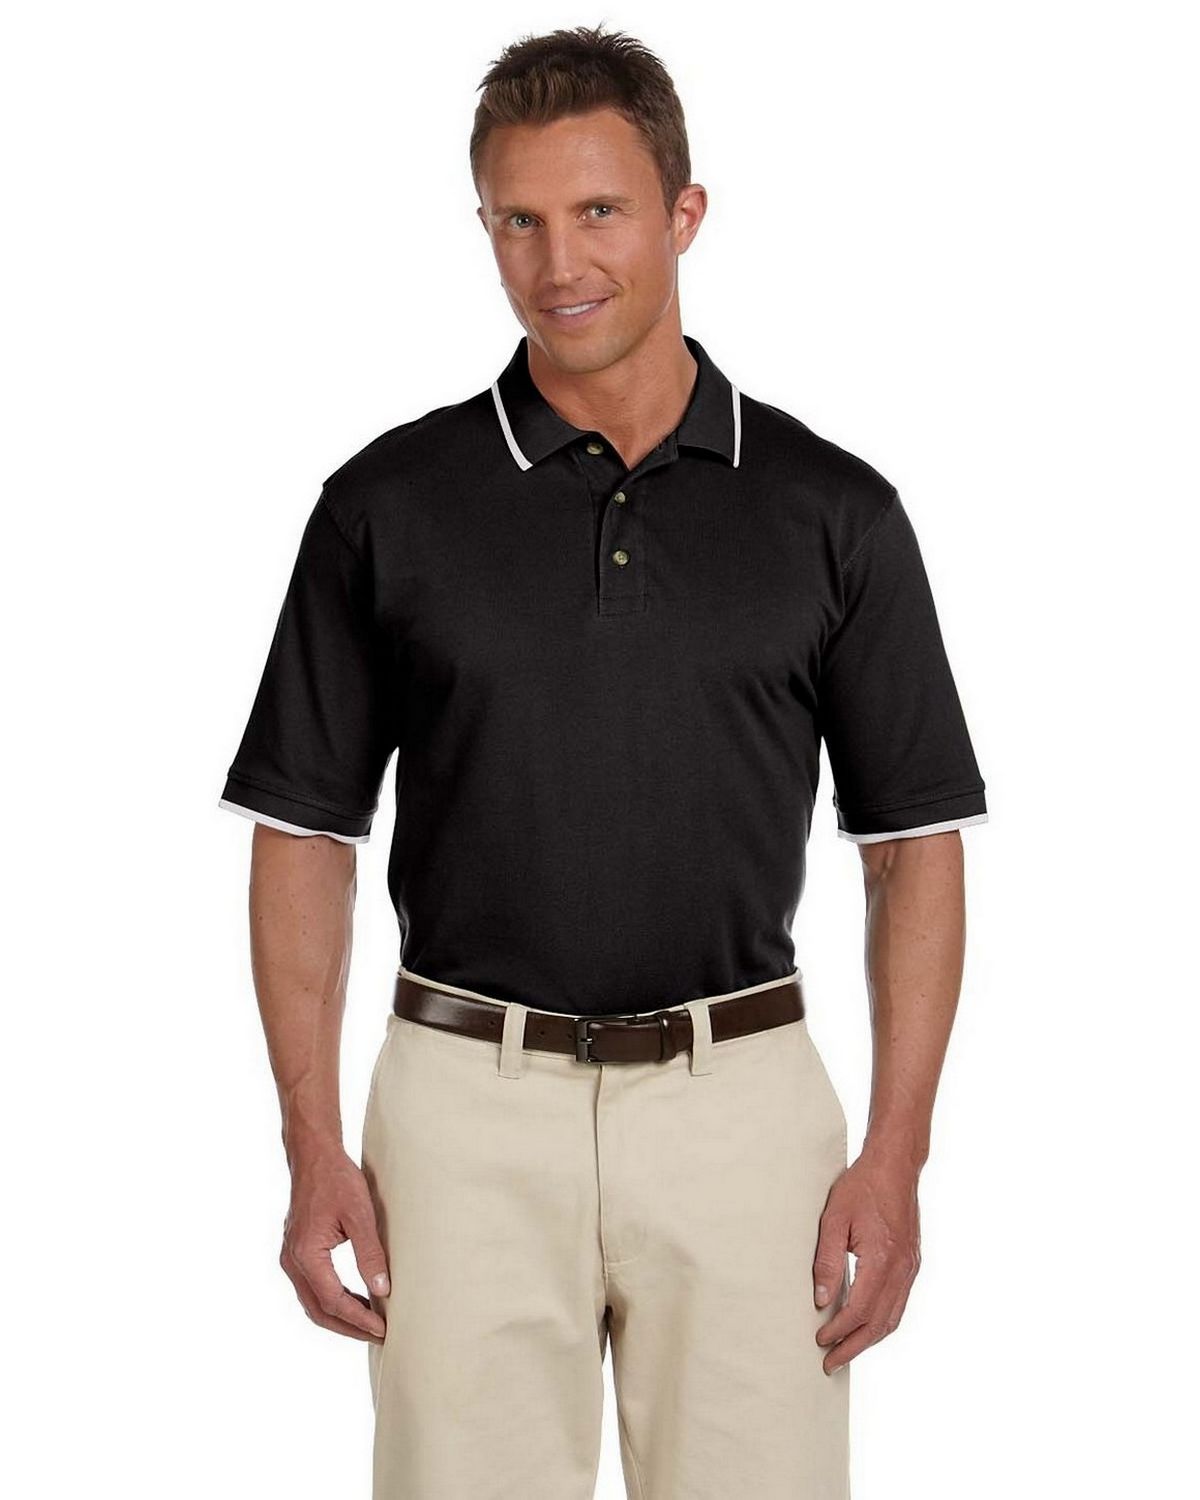 Harriton M210 Mens Short-Sleeve Pique Polo with Tipping - ApparelnBags.com